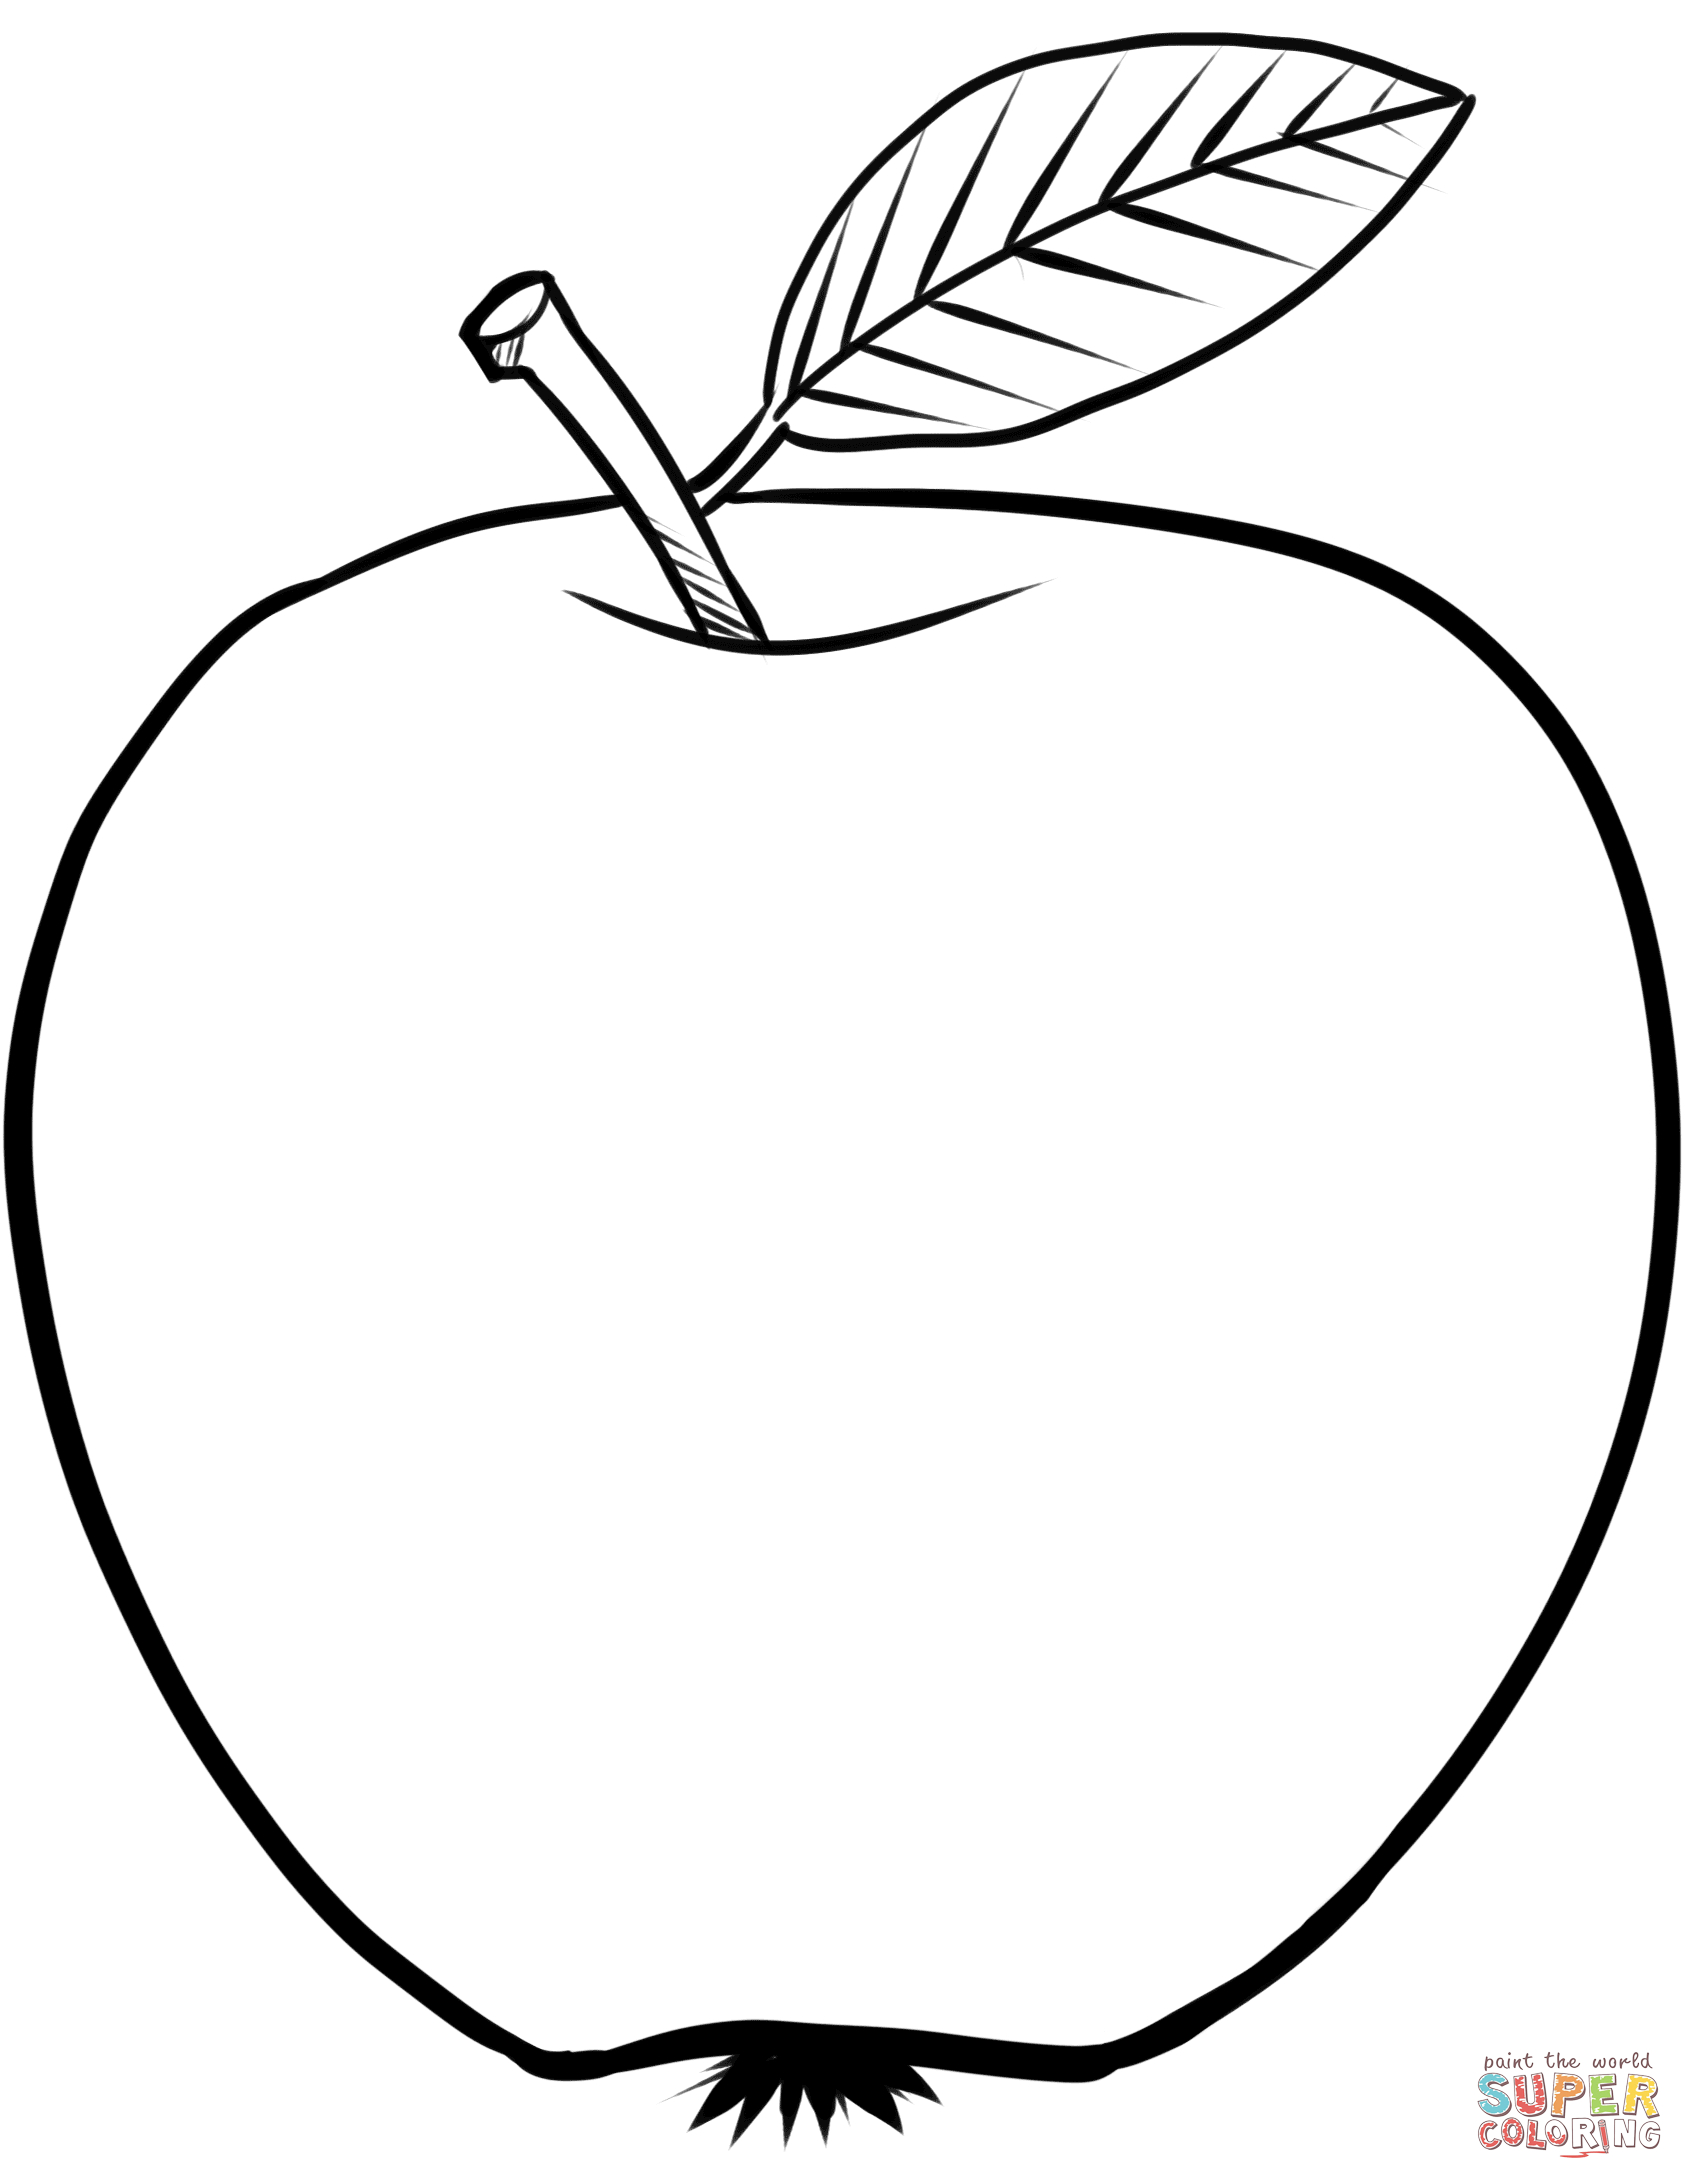 Printable Apple Coloring Pages Apple Coloring Page Free Printable Coloring Pages